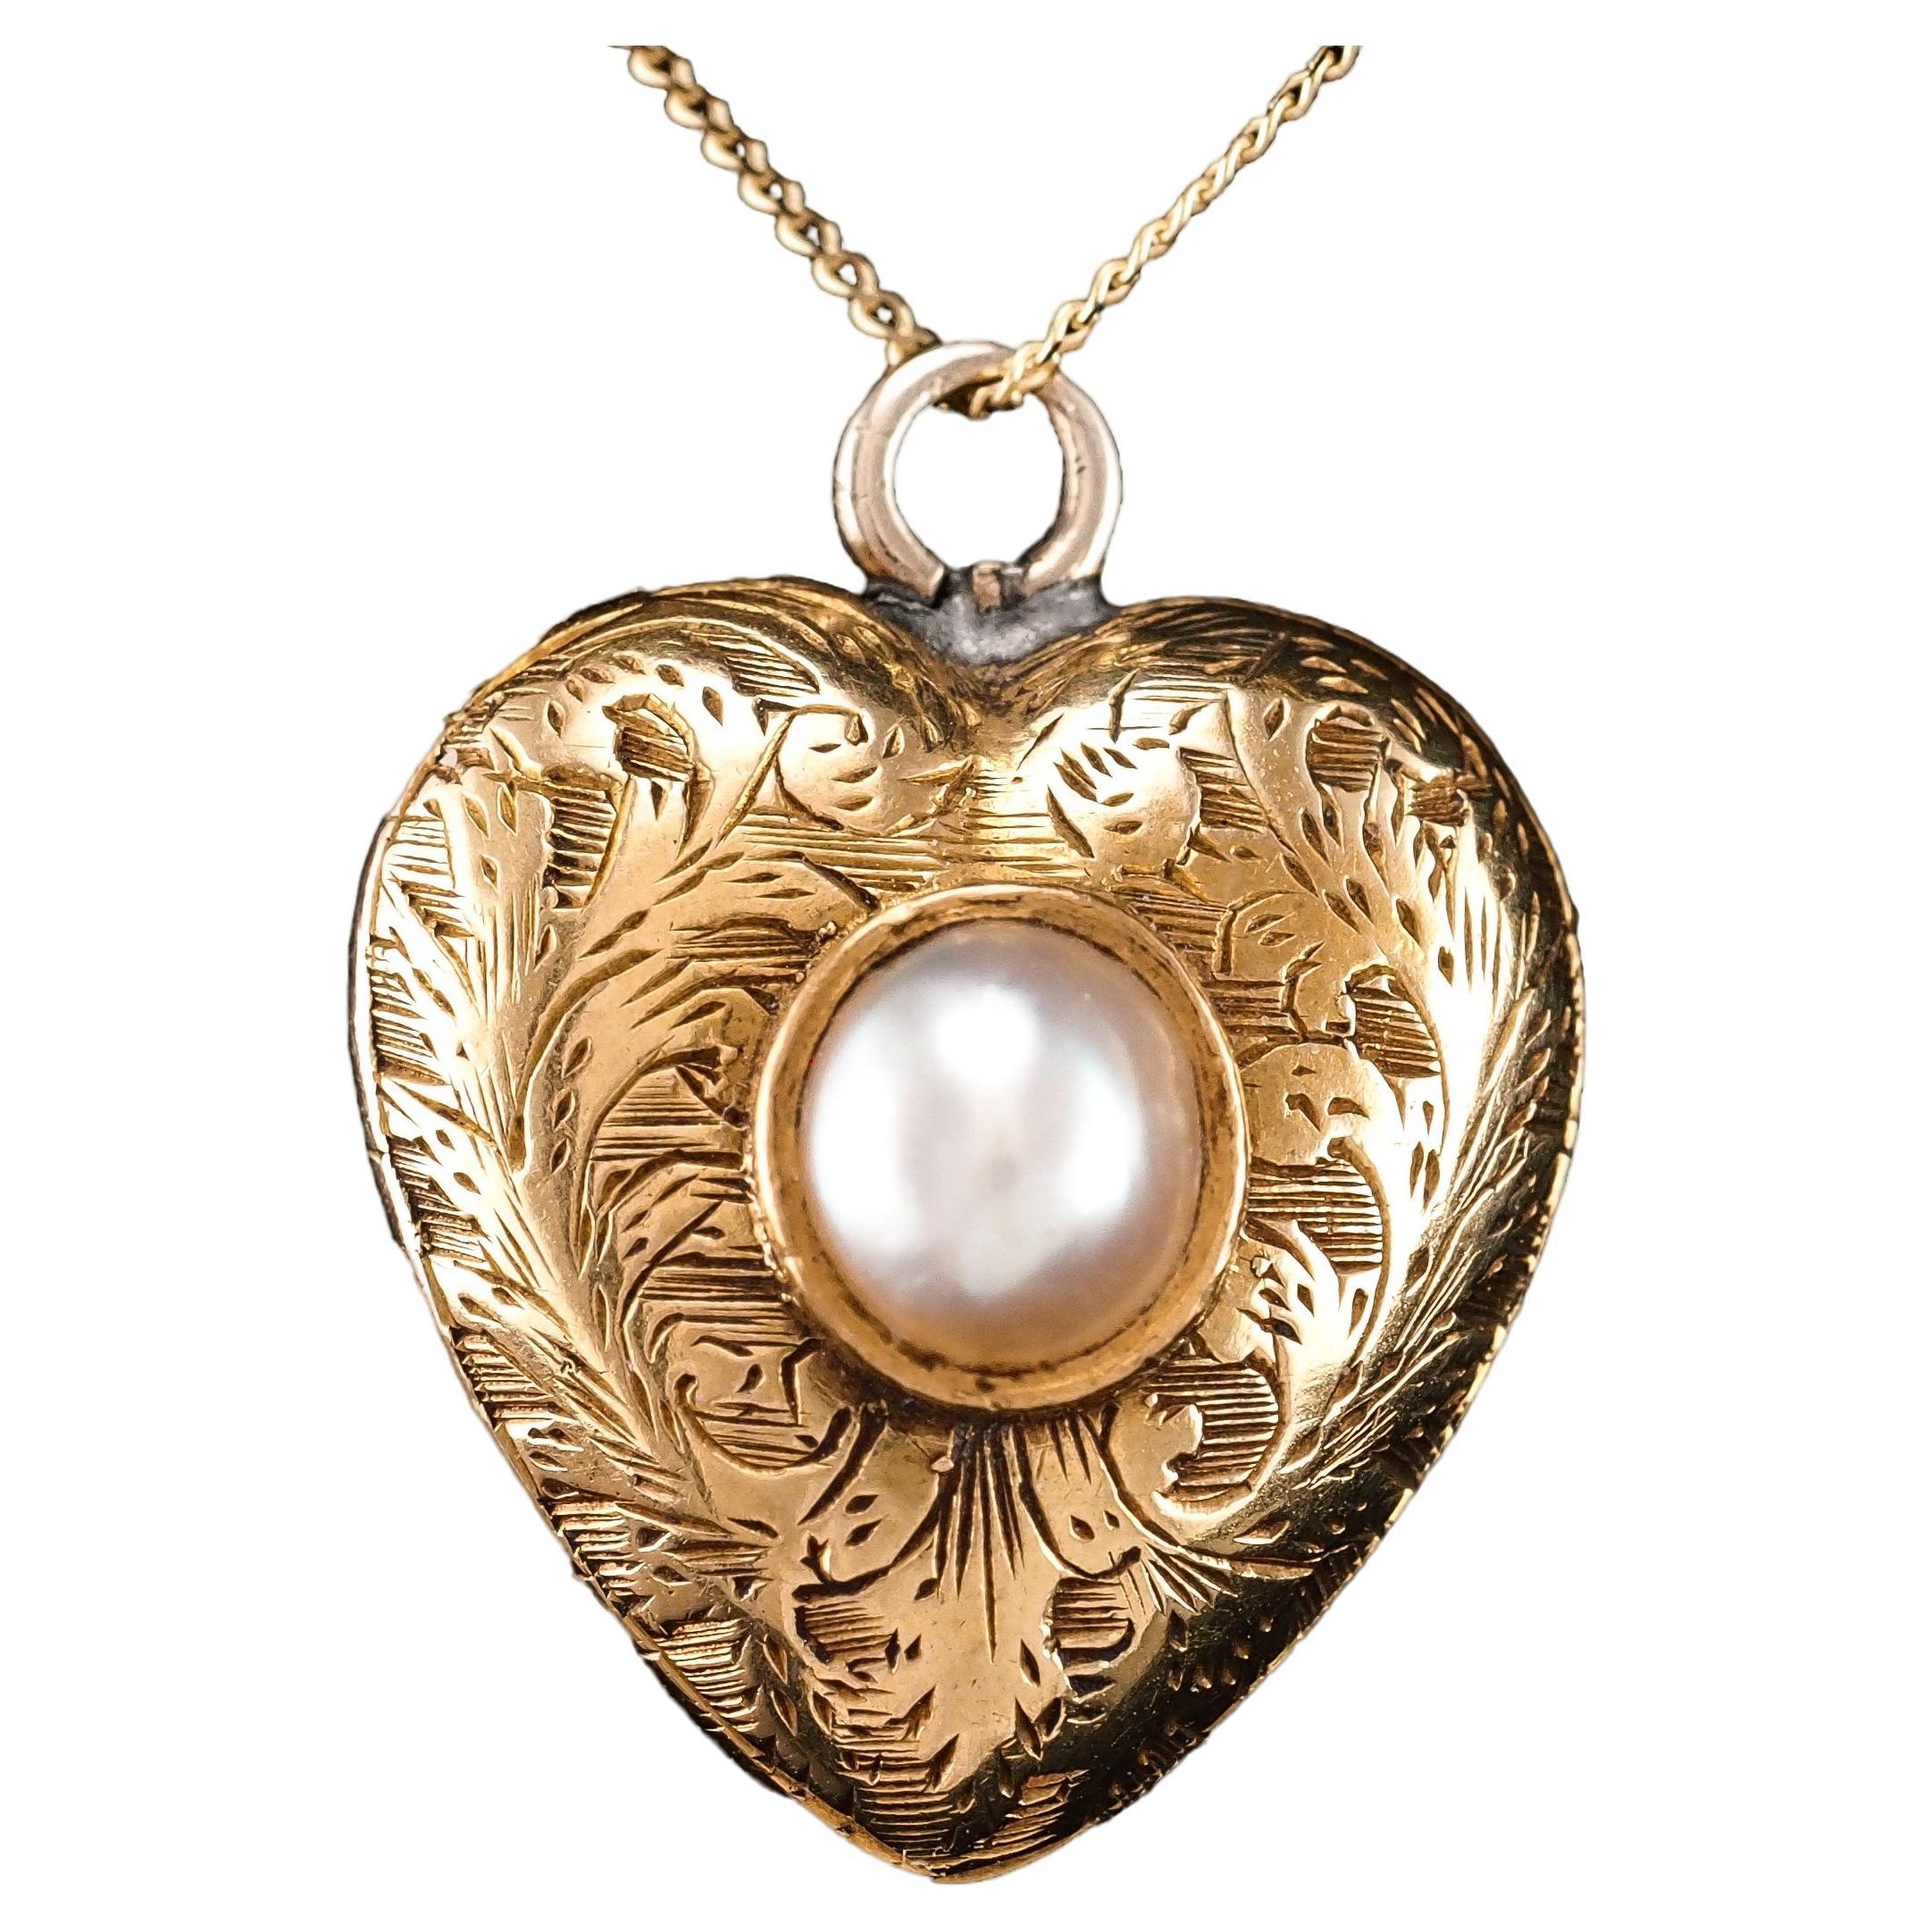 Antique 18K Gold Heart Charm Pendant Necklace with Pearl - Victorian c.1890